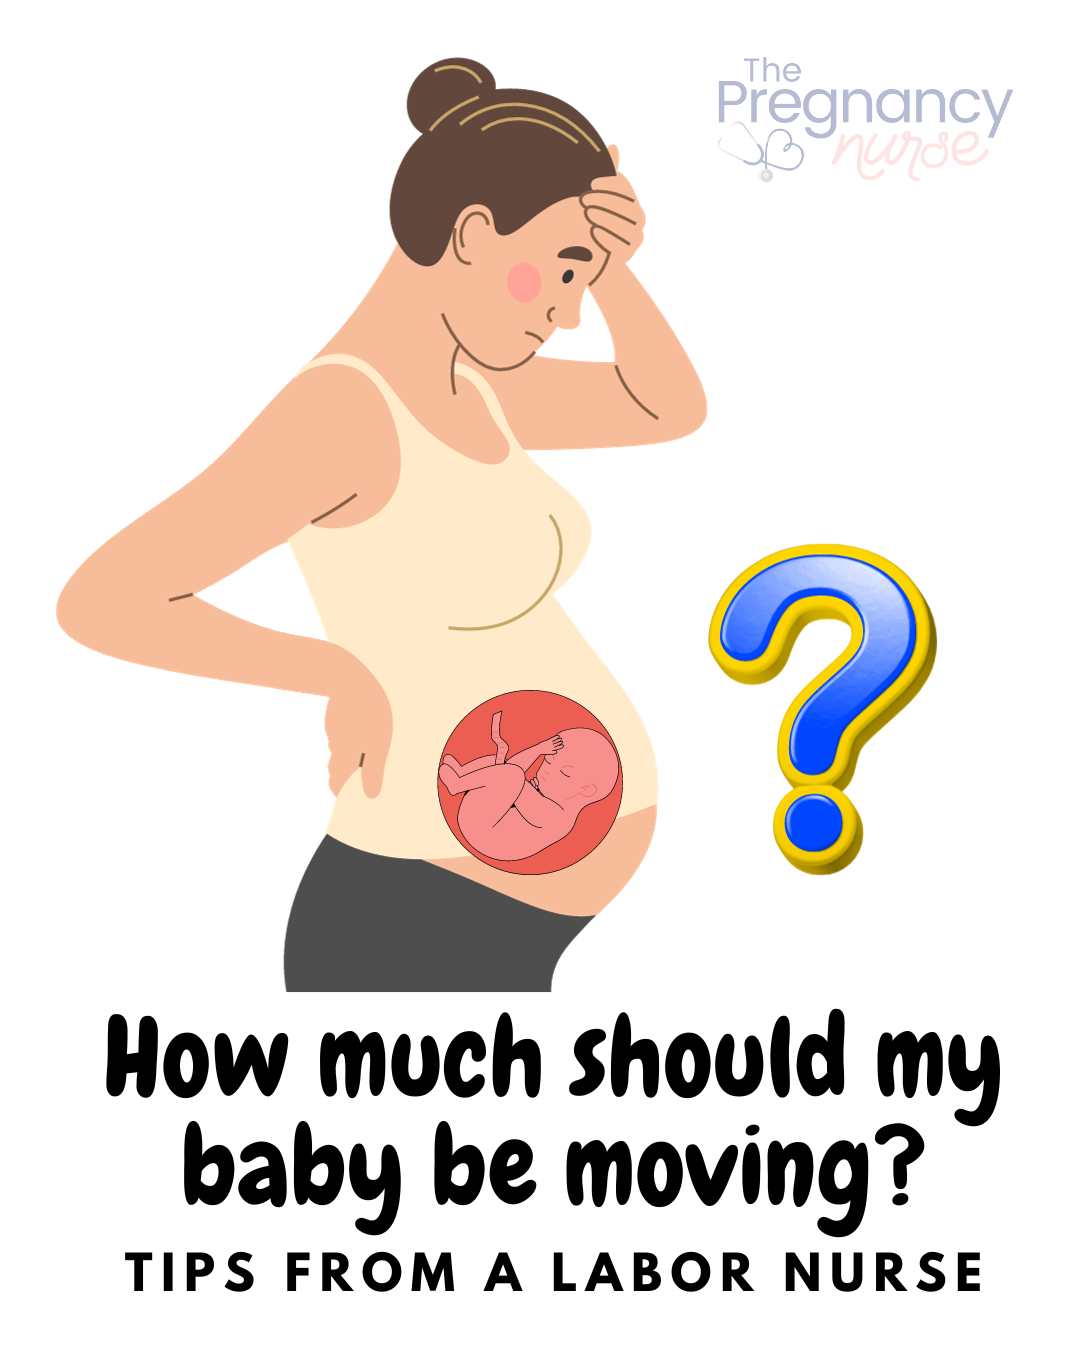 Unveil the mystery of your baby's growth! Dive into our guide for daily fetal movement counting, or "kick counting", a simple yet crucial routine for monitoring your baby's health. Our tips make this activity seamless and enjoyable. Start your journey with us as you foster the bond with your little one. Let's celebrate each kick together!